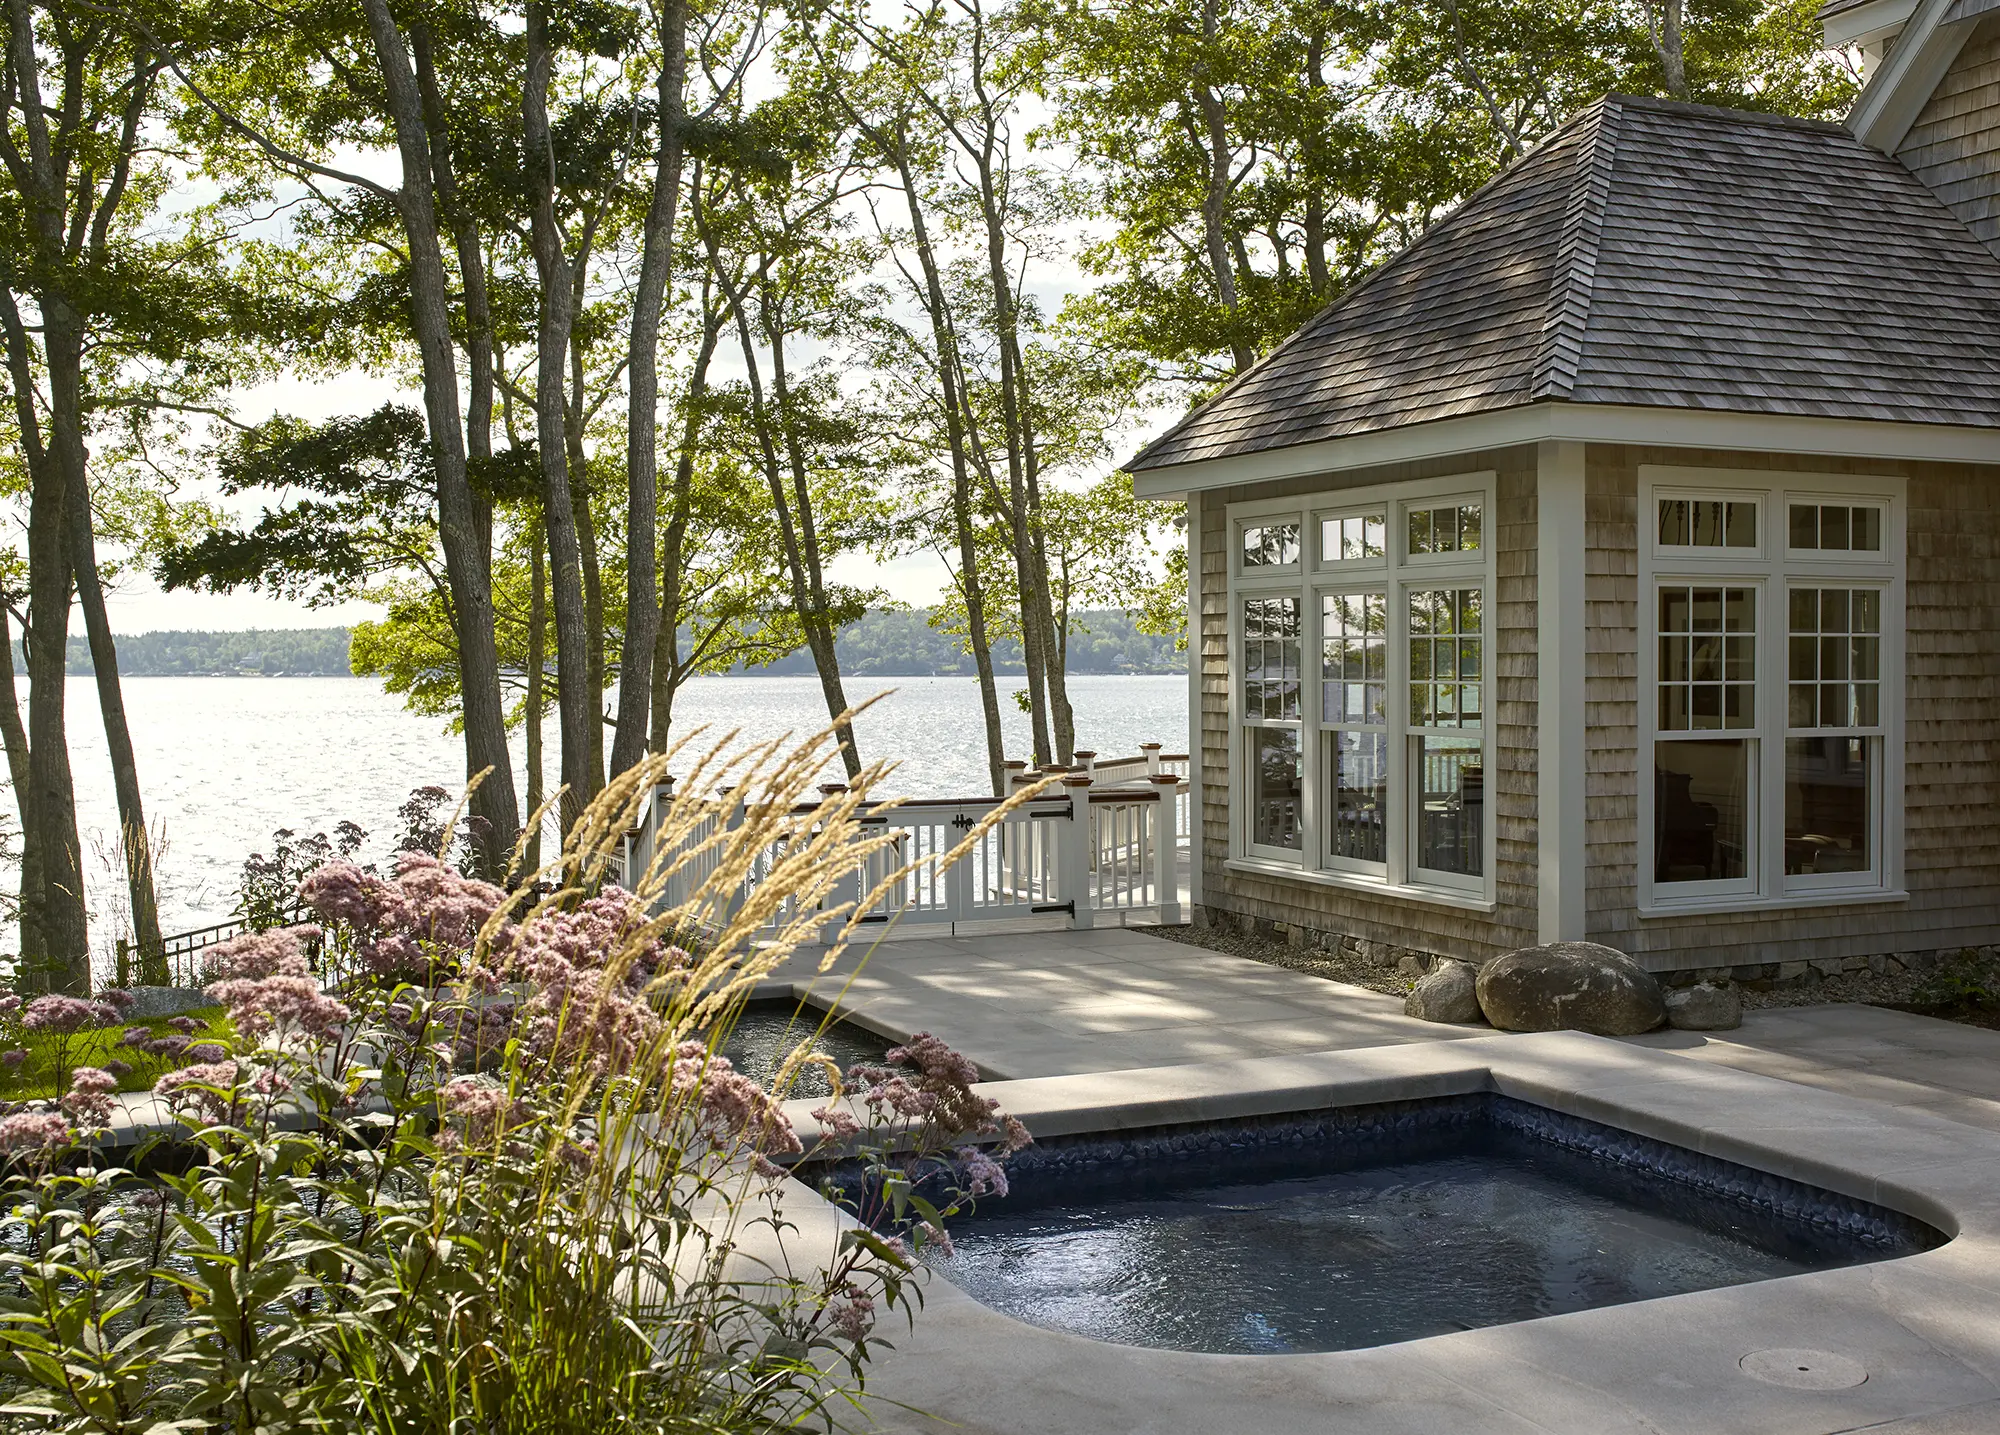 Outdoor patio and hot tub